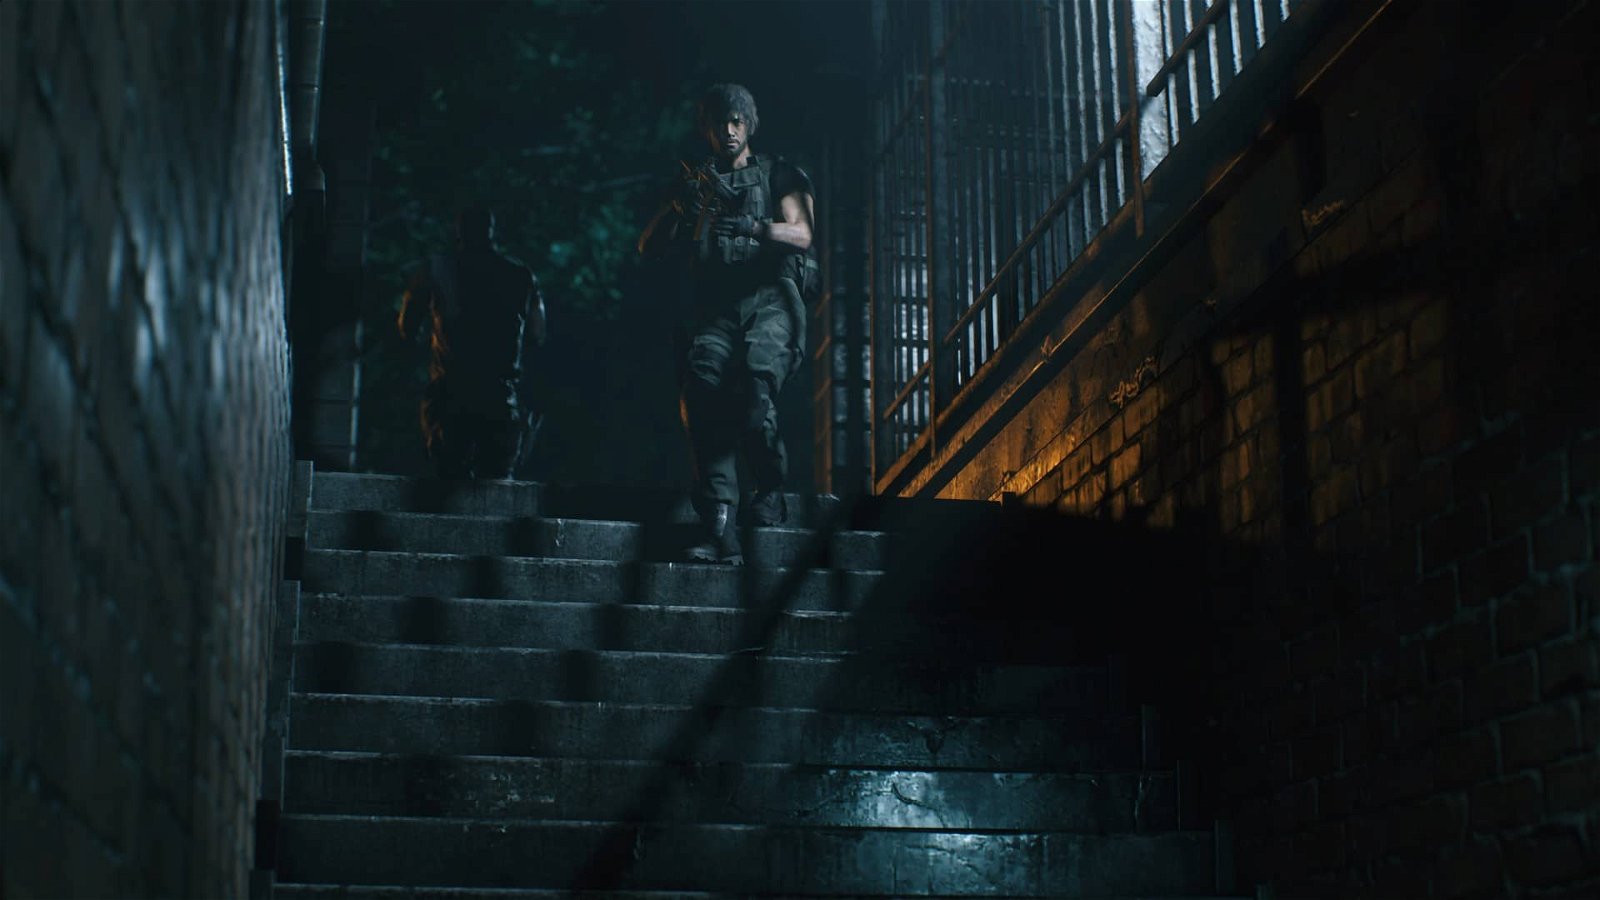 New Resident Evil 3 Remake trailer shows us a fierce looking Nemesis